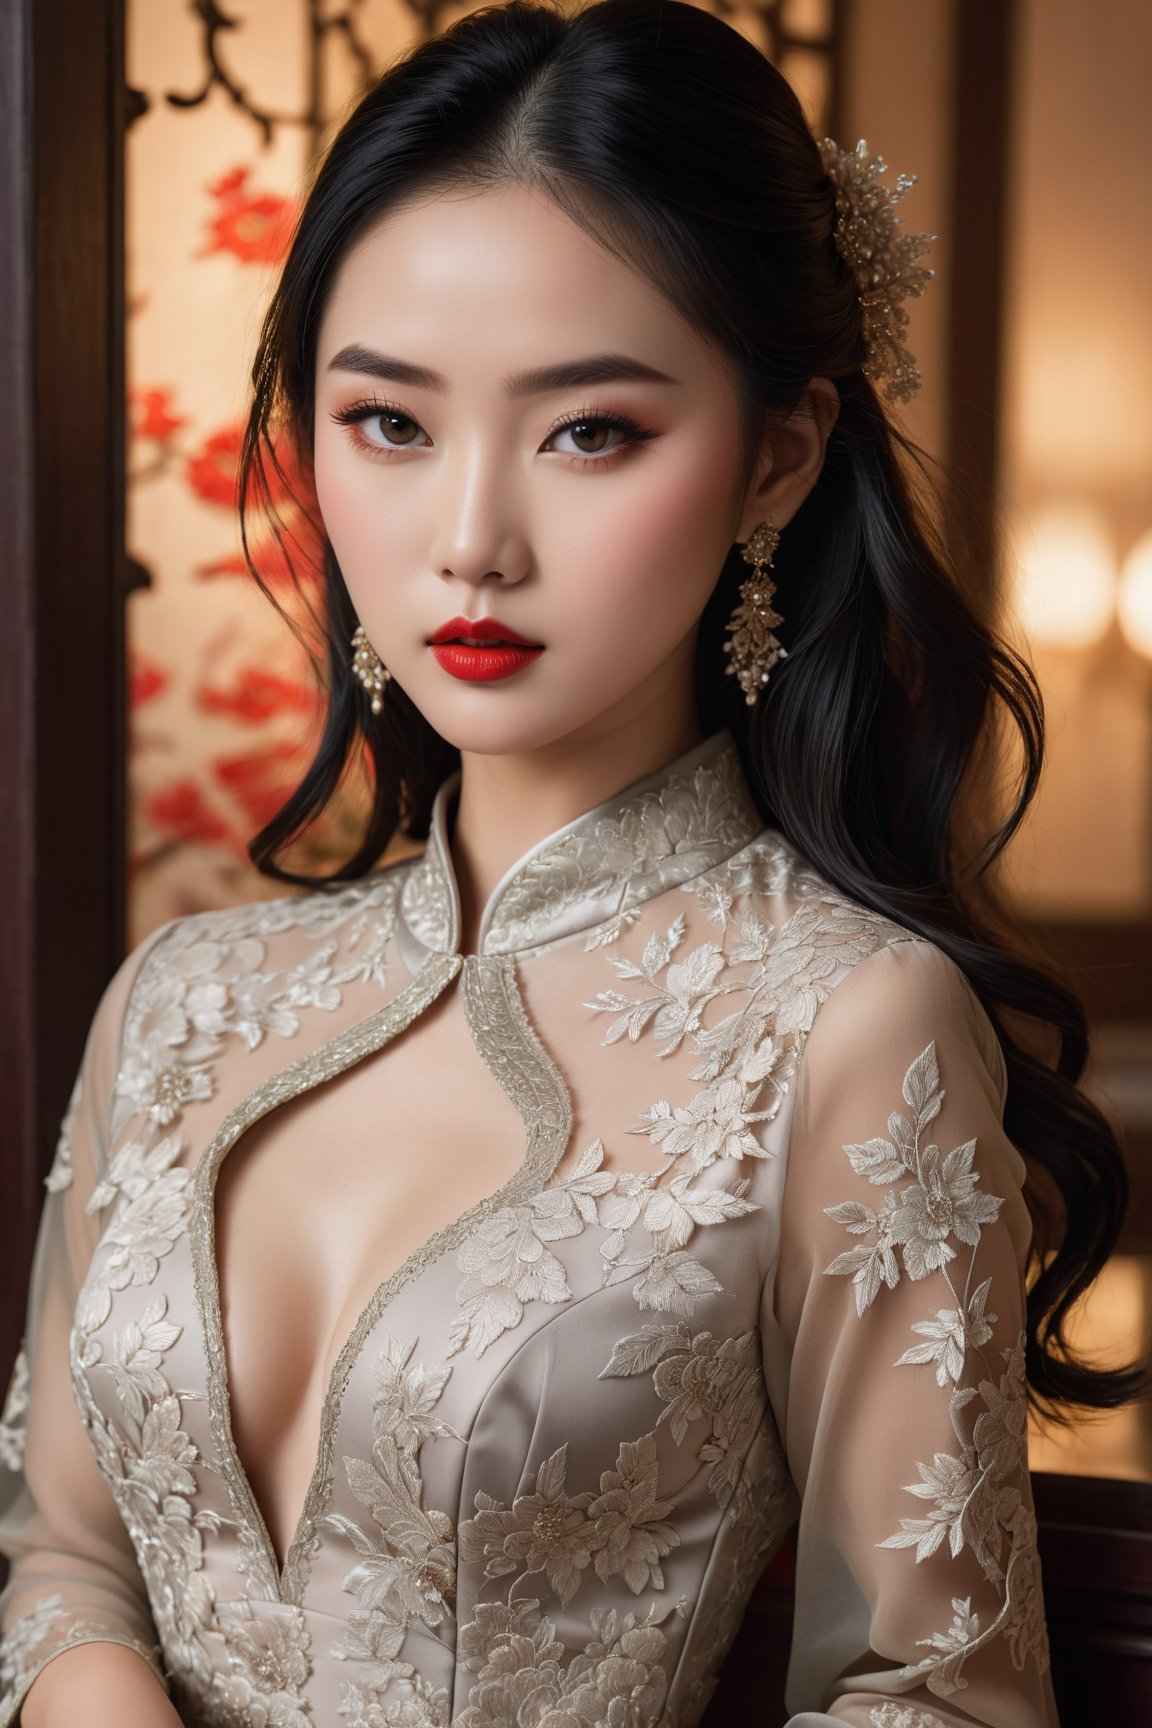 (best quality,4k,8k,highres,masterpiece:1.2),ultra-detailed,realistic:1.37,professional,portrait,chinese woman,beautiful detailed eyes,beautiful detailed lips,long black hair,perfectly shaped eyebrows,dark and alluring eyeshadow,natural blush on cheeks,flawless skin,high cheekbones,delicate features,feminine curves,sexy outfit that flatters her figure,form-fitting dress,red stiletto heels,posh and elegant surroundings,soft and sophisticated lighting,subtle and seductive pose,confident expression,alluring and mysterious gaze,vivid colors,subtle color grading to enhance warmth and richness,intricate details on clothing and accessories,masterfully crafted lace patterns,on-trend fashion design with an Asian influence,impeccable attention to texture and fabric details,exquisite craftsmanship that showcases the beauty of Asian culture,reflection of inner strength and sensuality,celebration of Asian beauty and femininity.